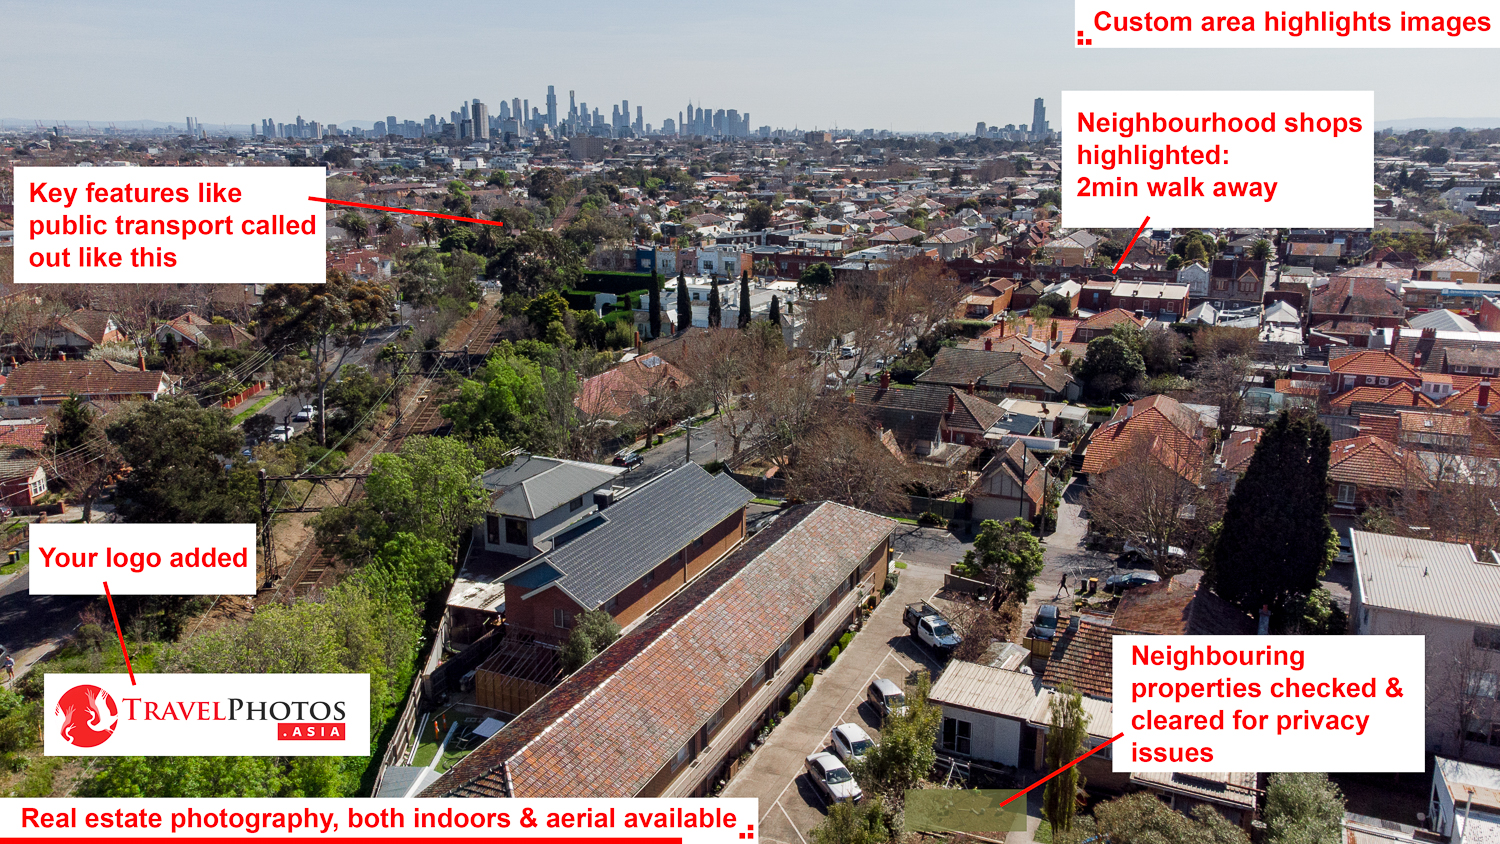 A real estate area view photo of Melbourne. Photo taken from drone.